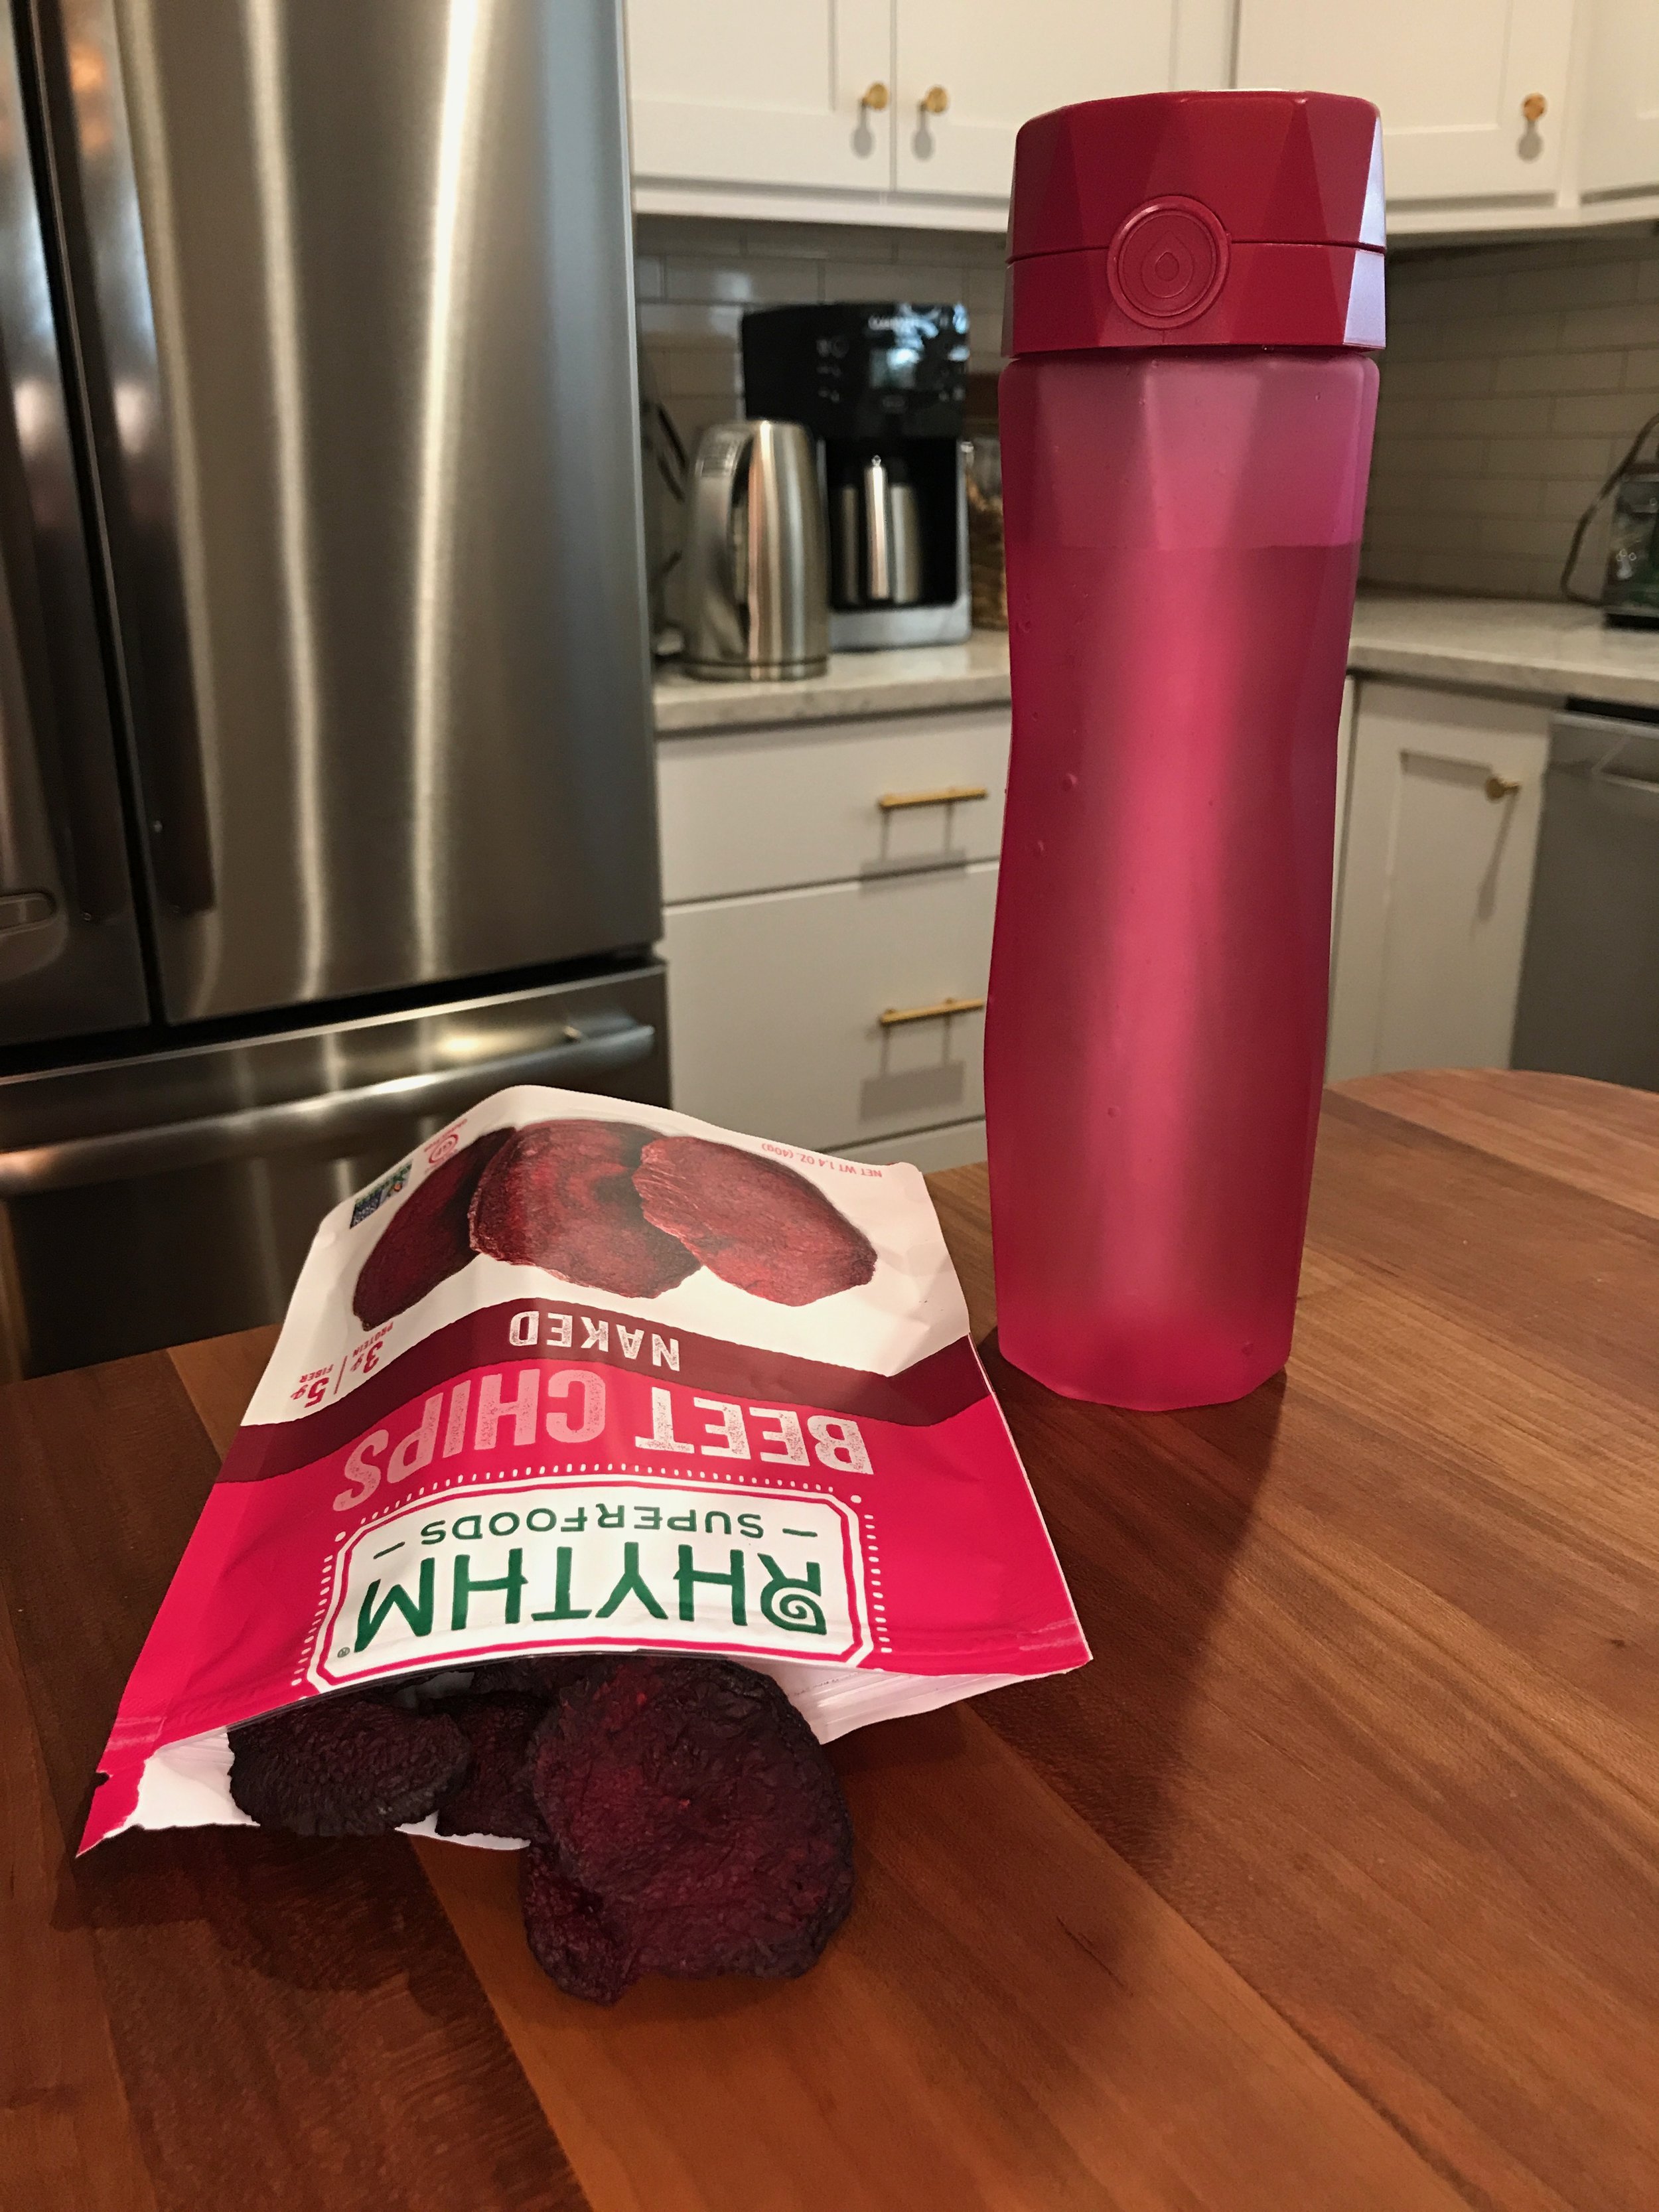 hidrate spark water bottle and rhythm beet chips